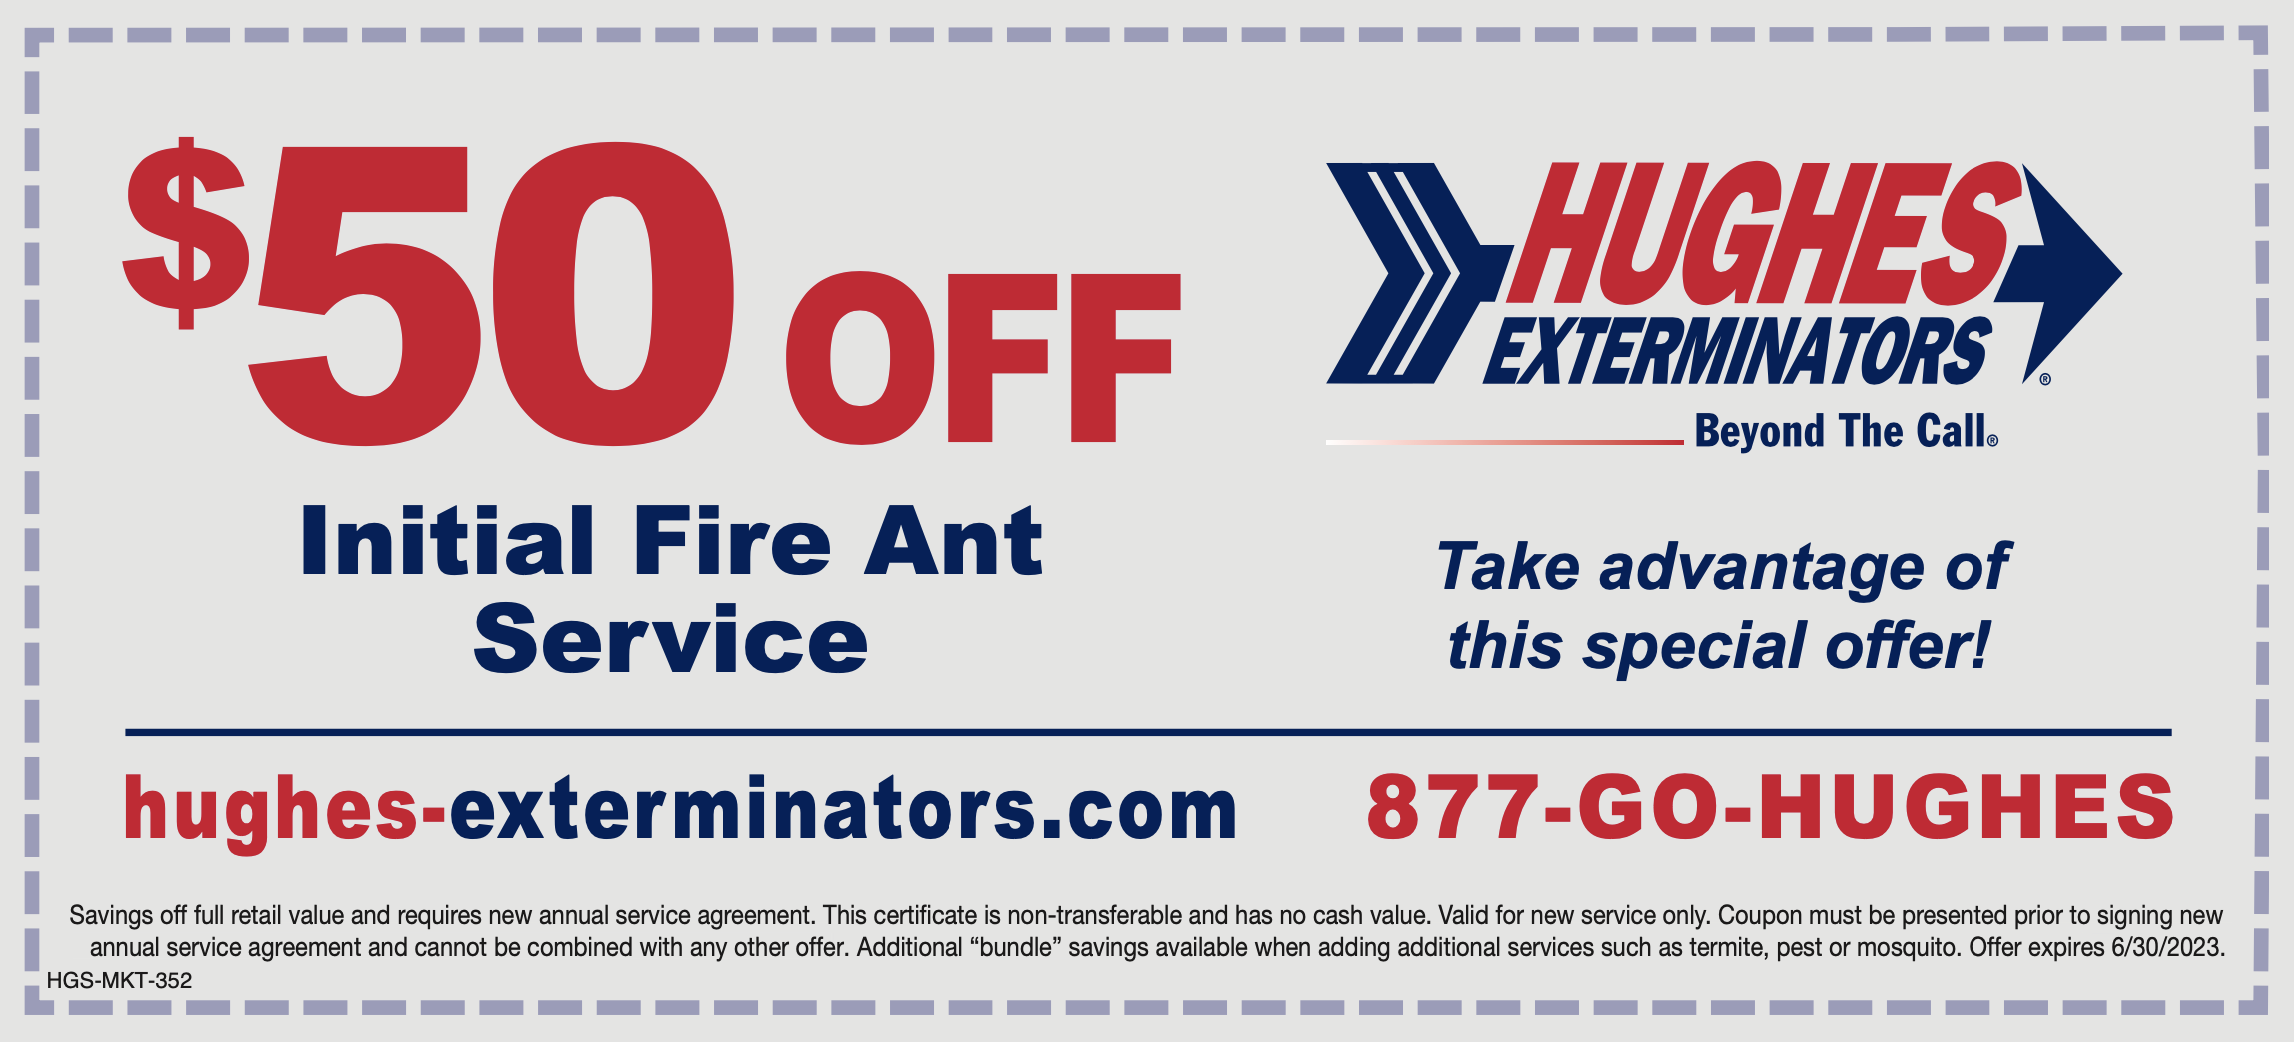 hughes_fire_ant_coupon_exp_2023.png